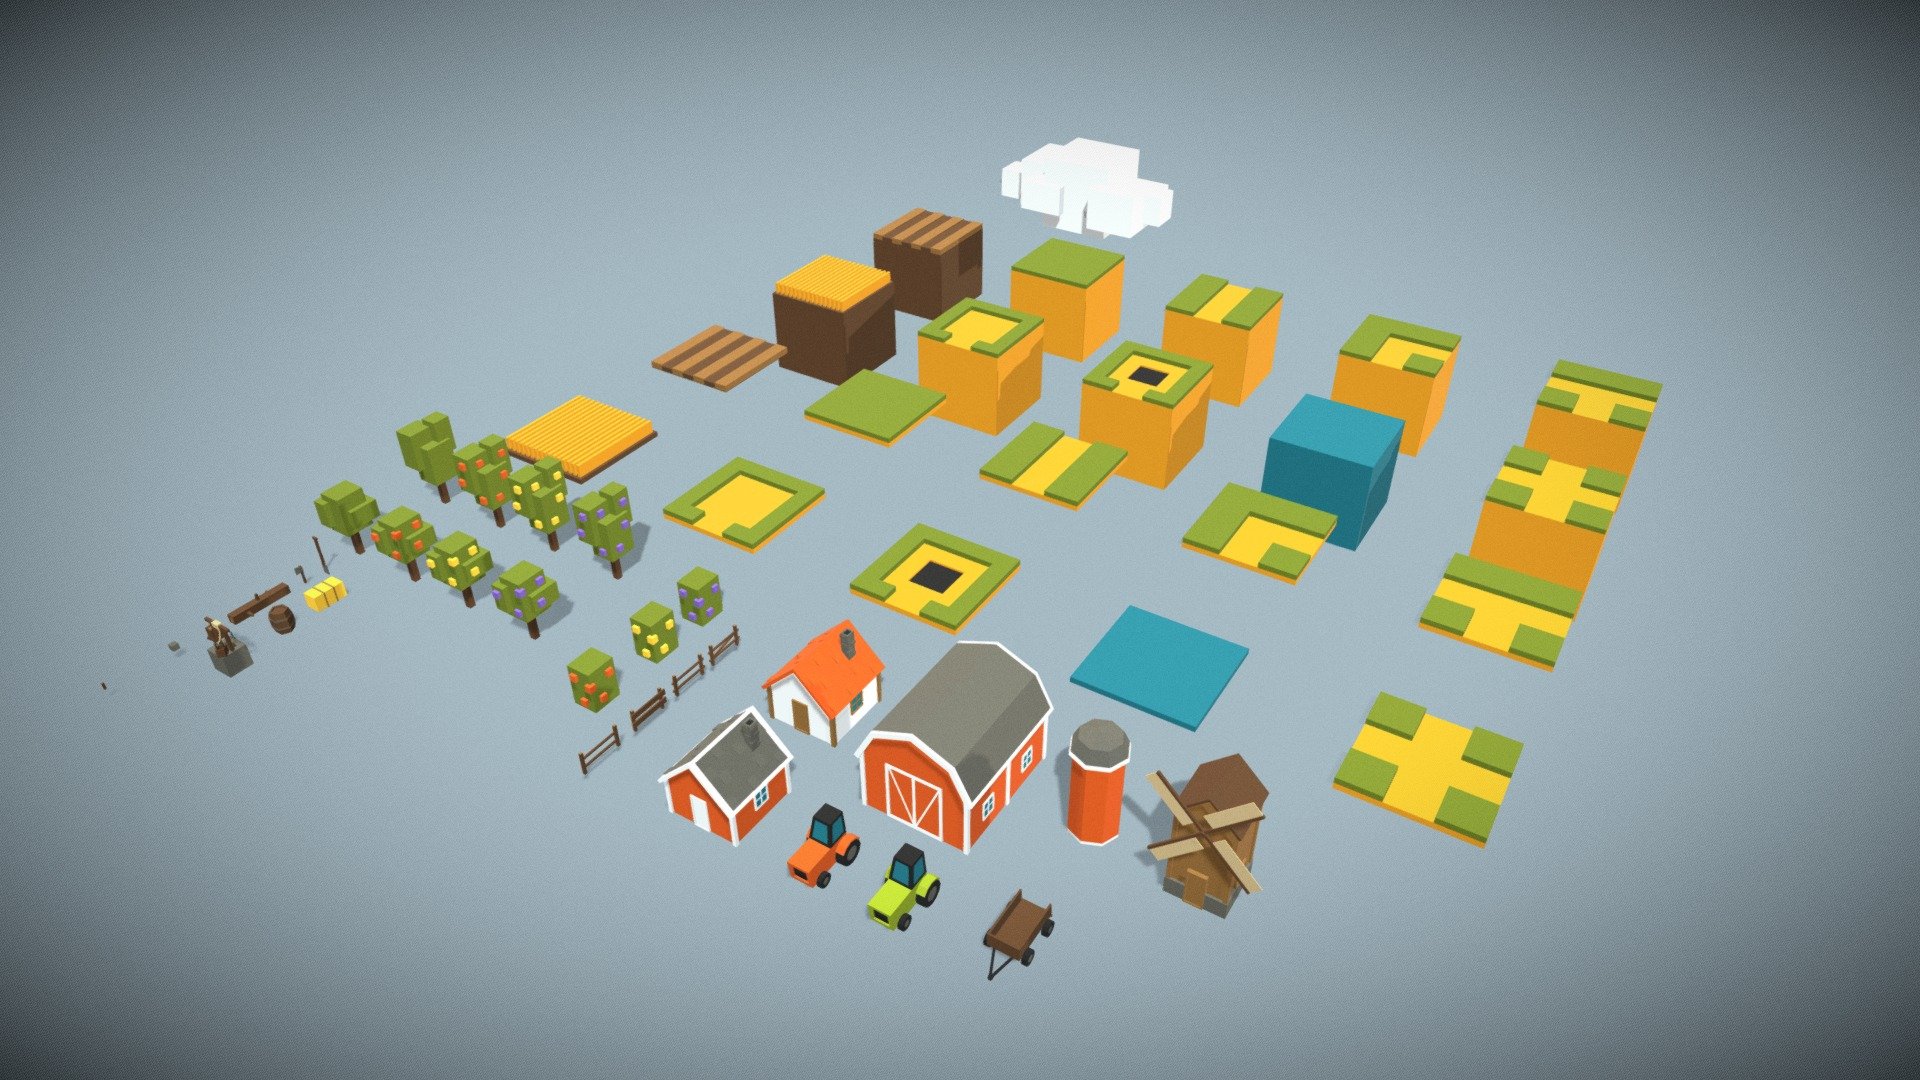 Pack contain low poly models of farm environment.
With this package you can create beautiful and simple environments for PC and mobile games.

Features:
- 54 fbx meshes
- One 256 x 256 texture atlas for all models (except cloud)
- Showcase scene - Low poly Farm environment package - 3D model by FreeDimensionForge 3d model